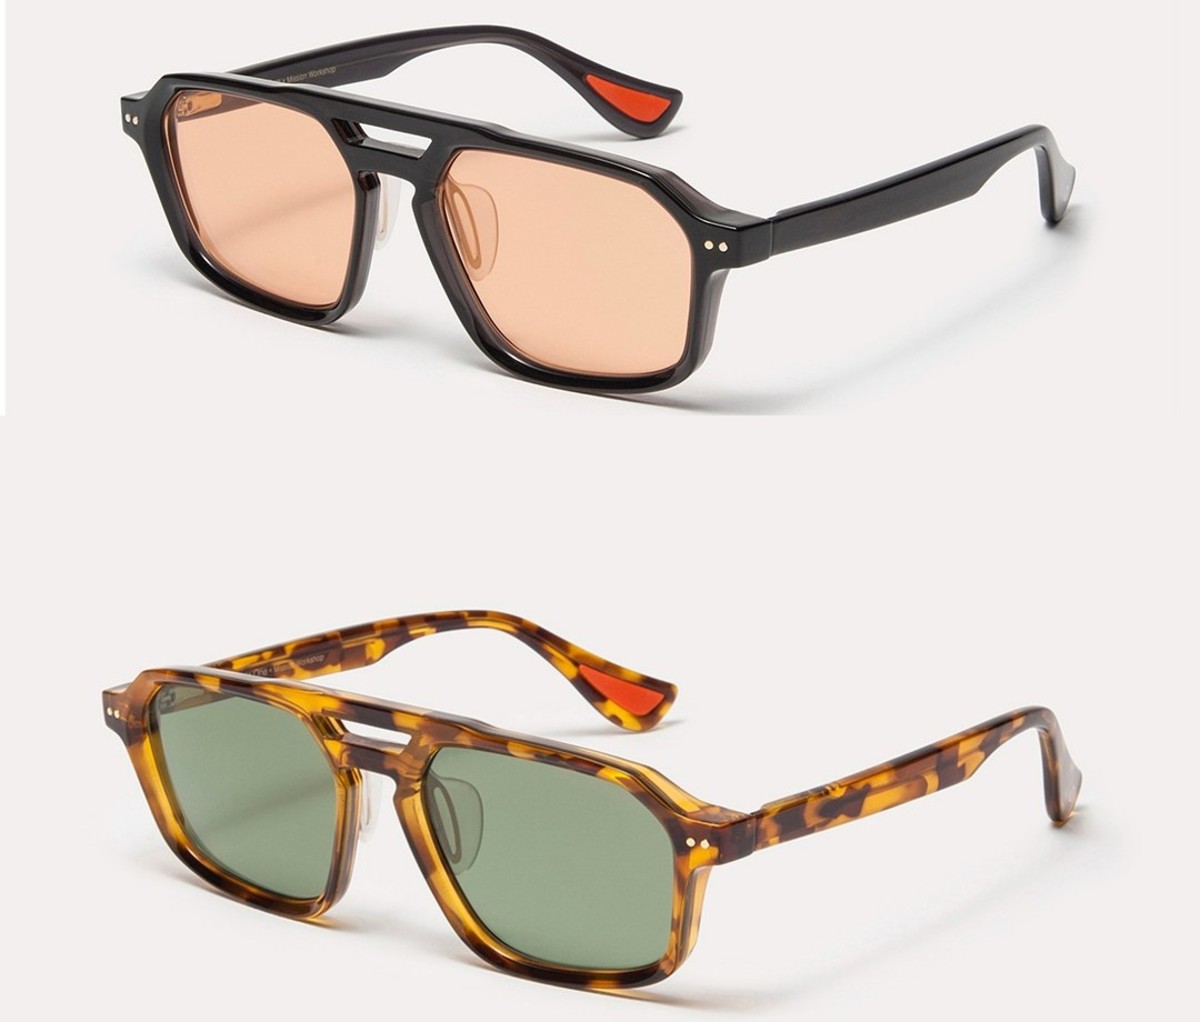 Article One x Mission Workshop sunglasses in black/amber and tortoise